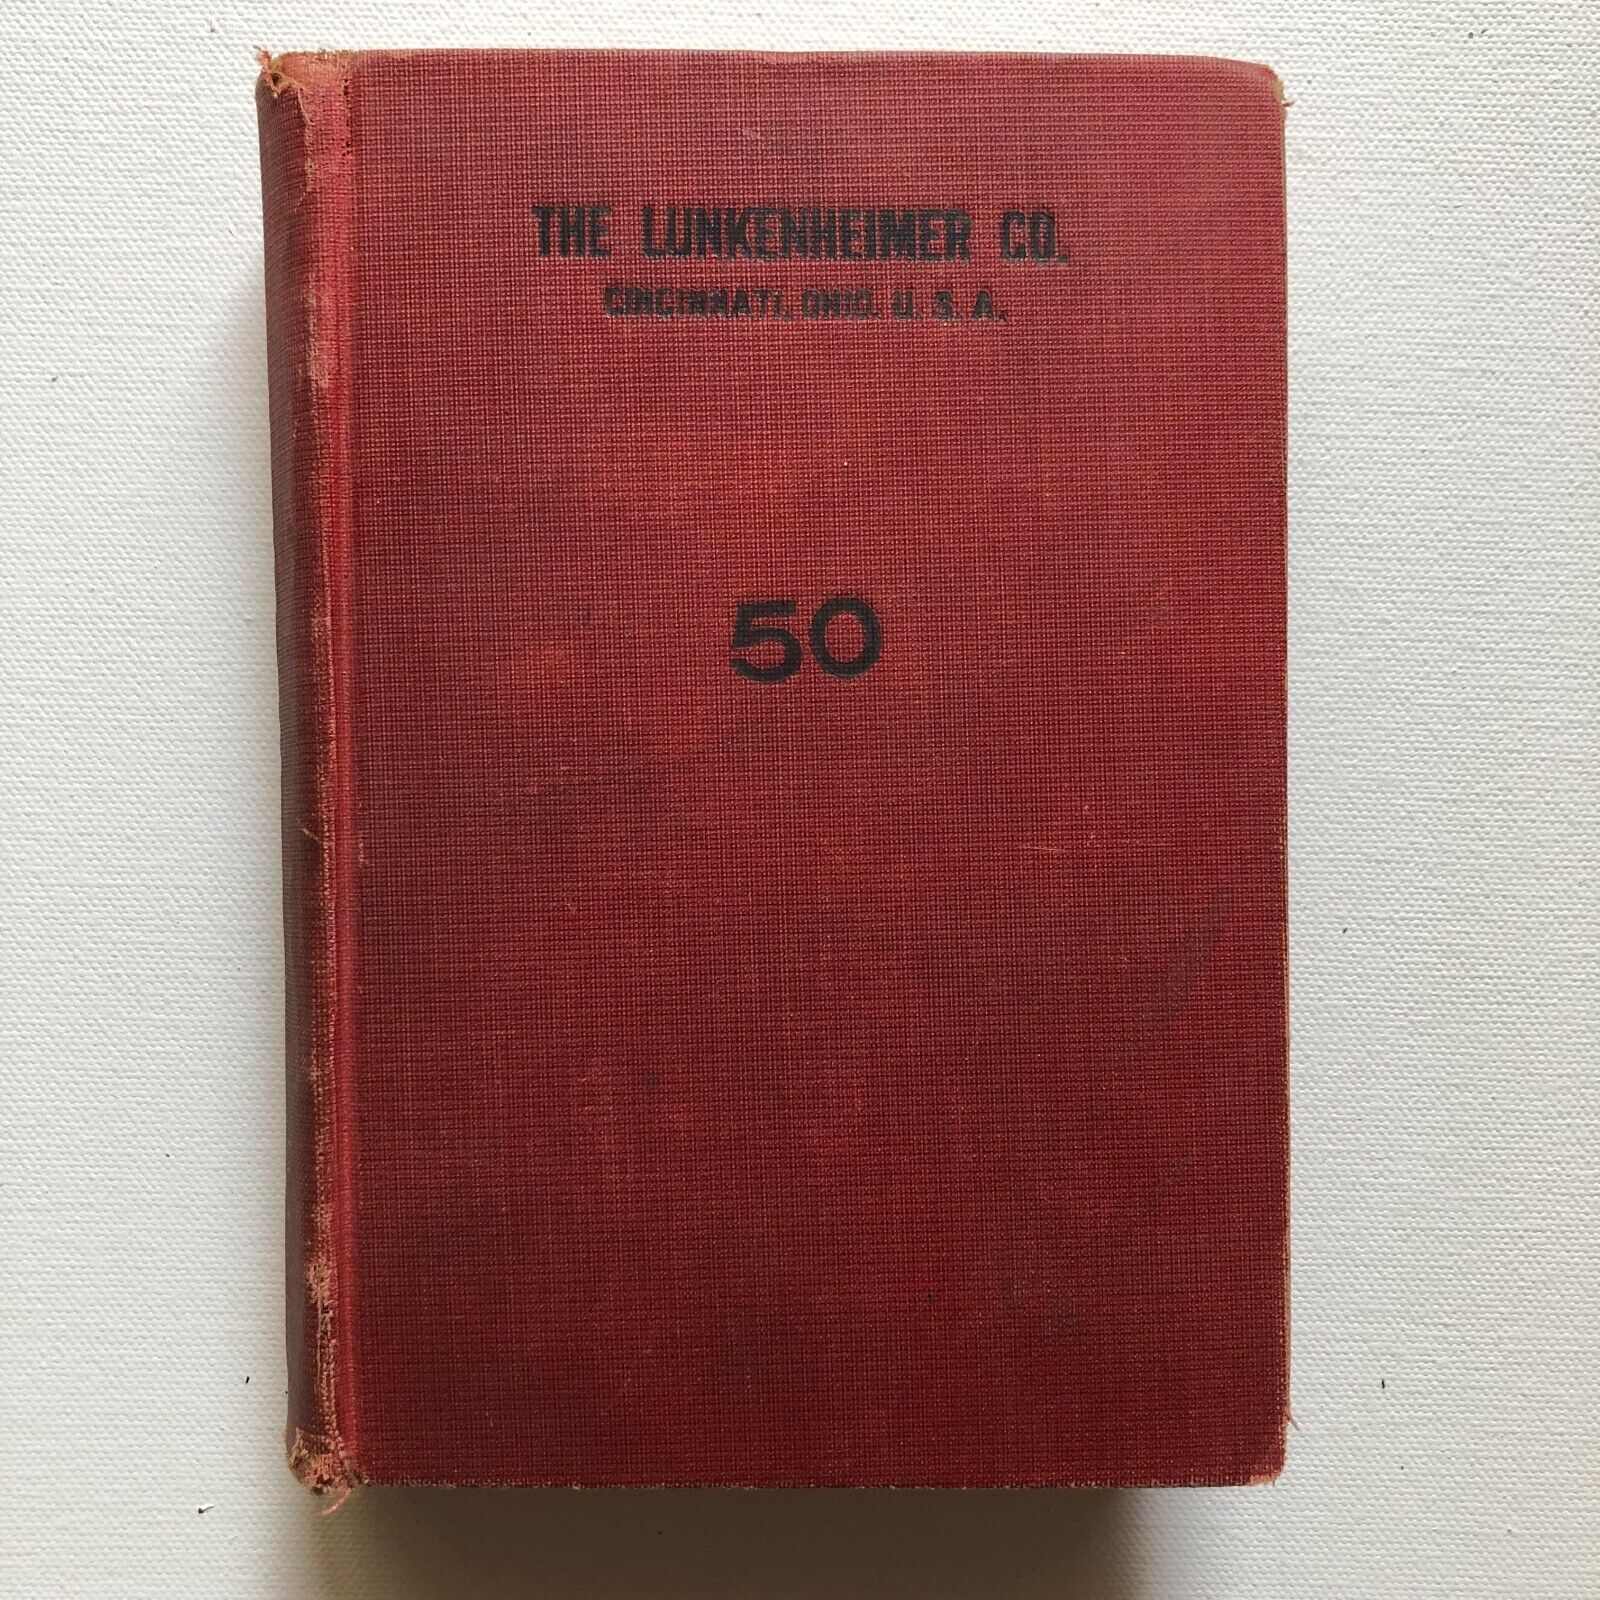 The Lunkenheimer Co. 50 illustrated catalogue